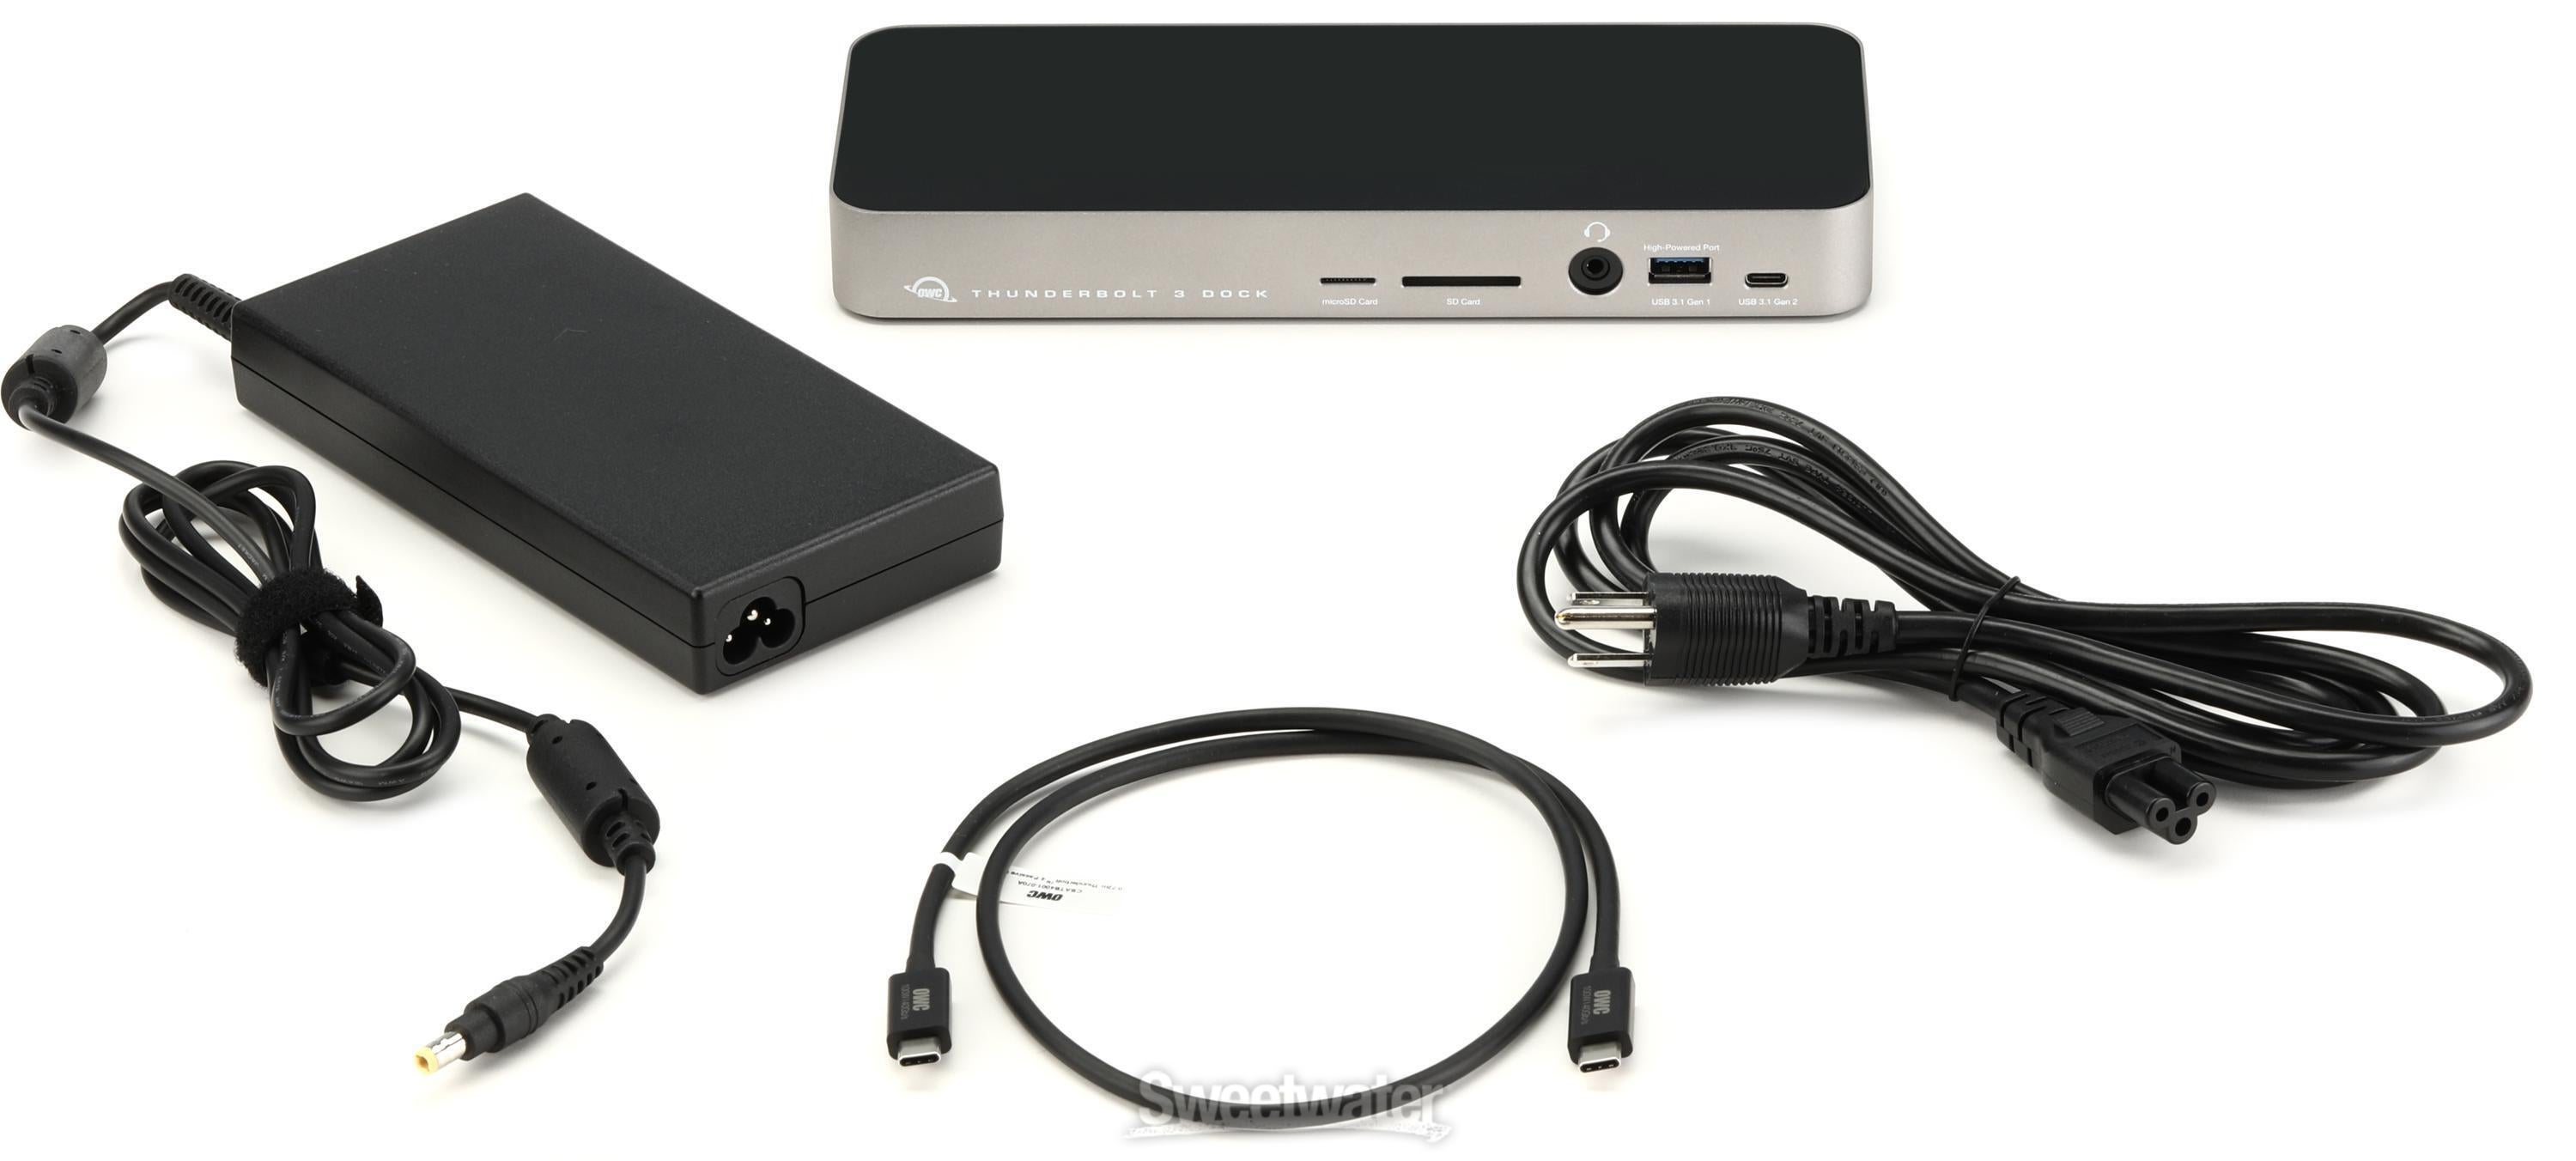 OWC 14-port Thunderbolt Dock - Space Gray | Sweetwater